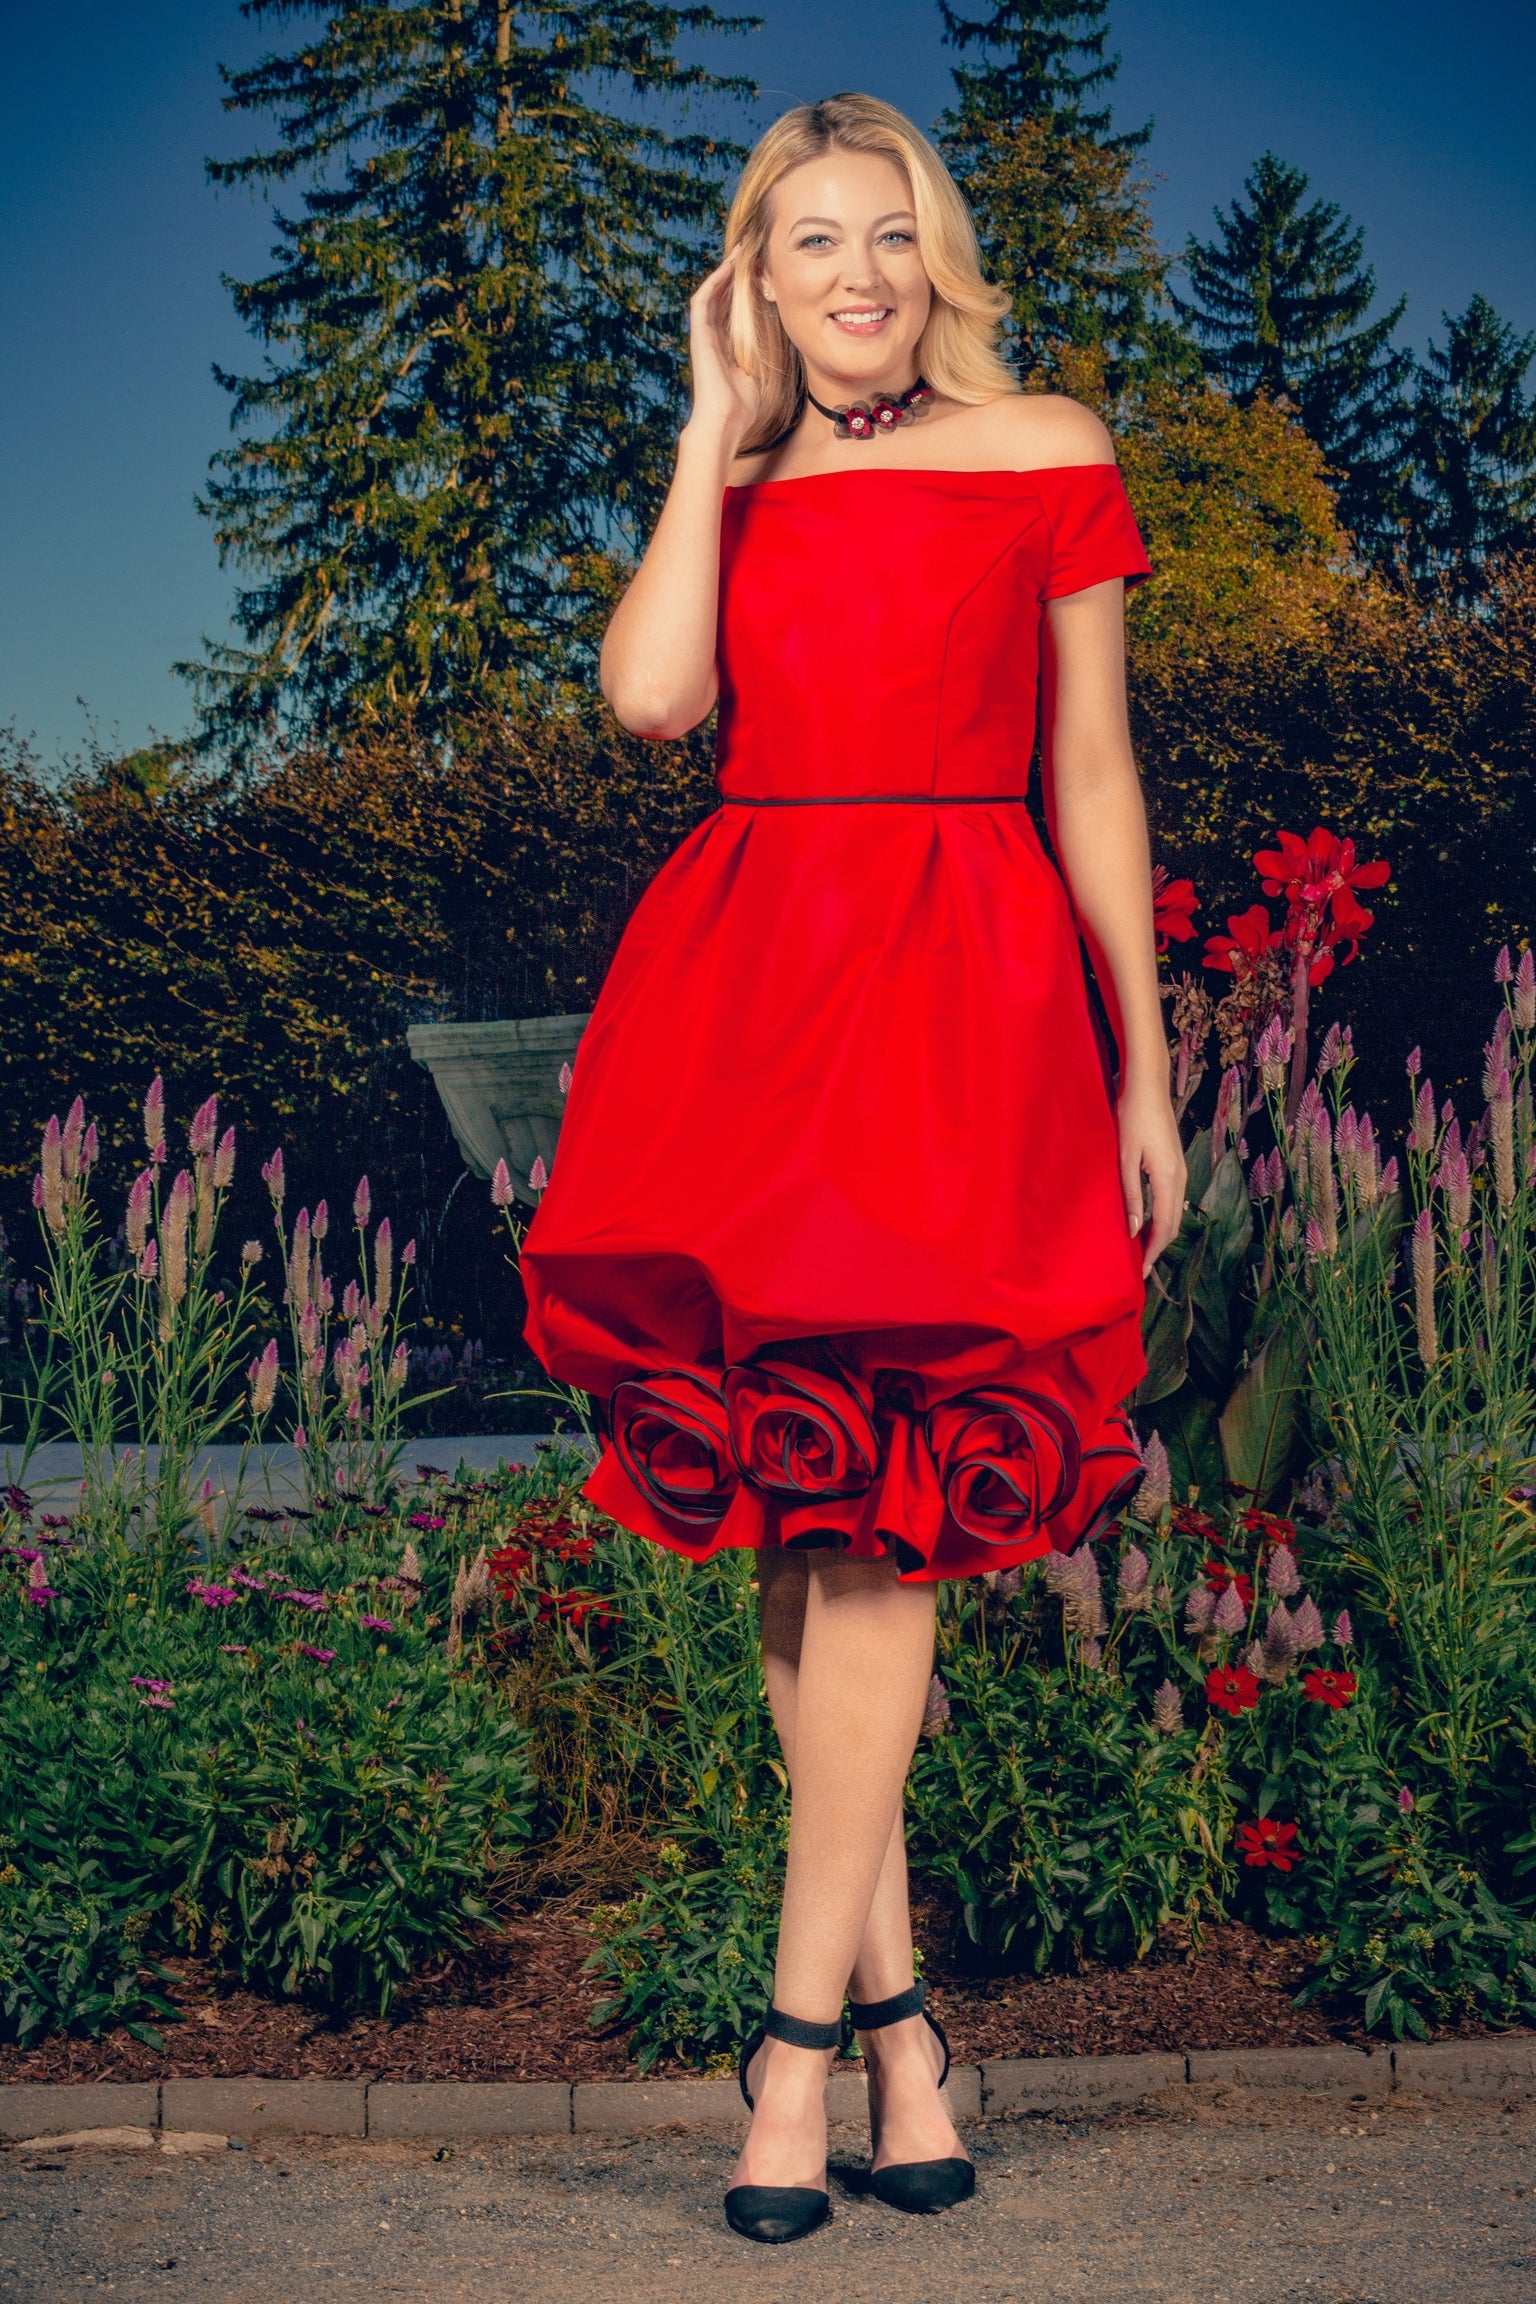 anna nieman designer dress Boston. Everyone's excitement! A rich red off-the-shoulder dress, with the skirt finished with luxurious roses.